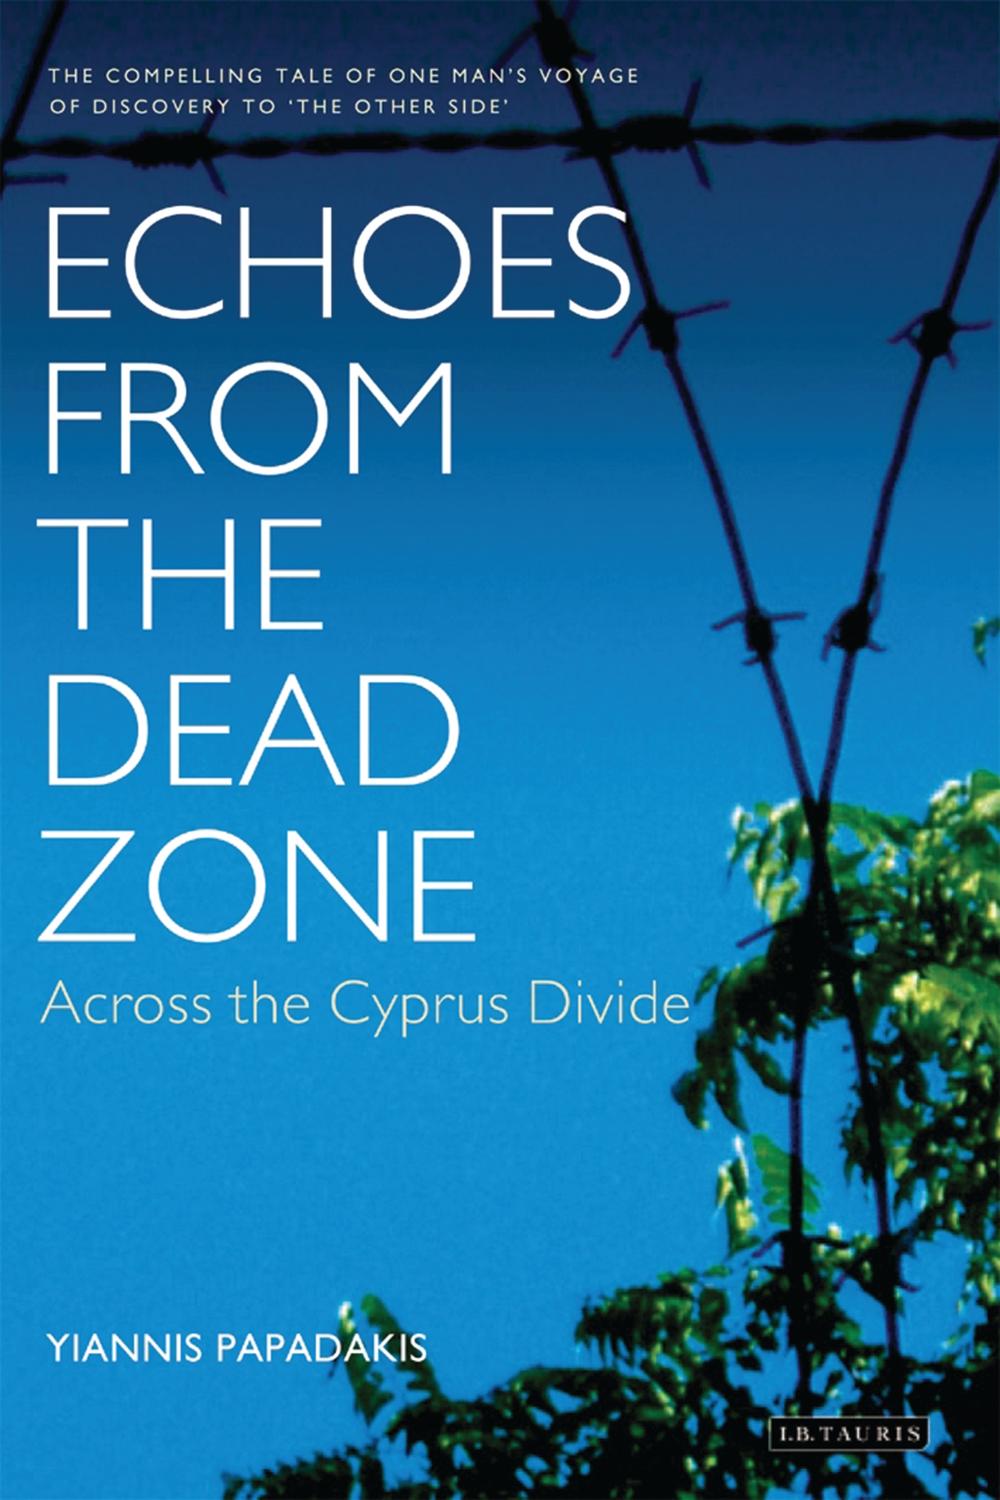 Echoes from the Dead Zone - Yiannis Papadakis